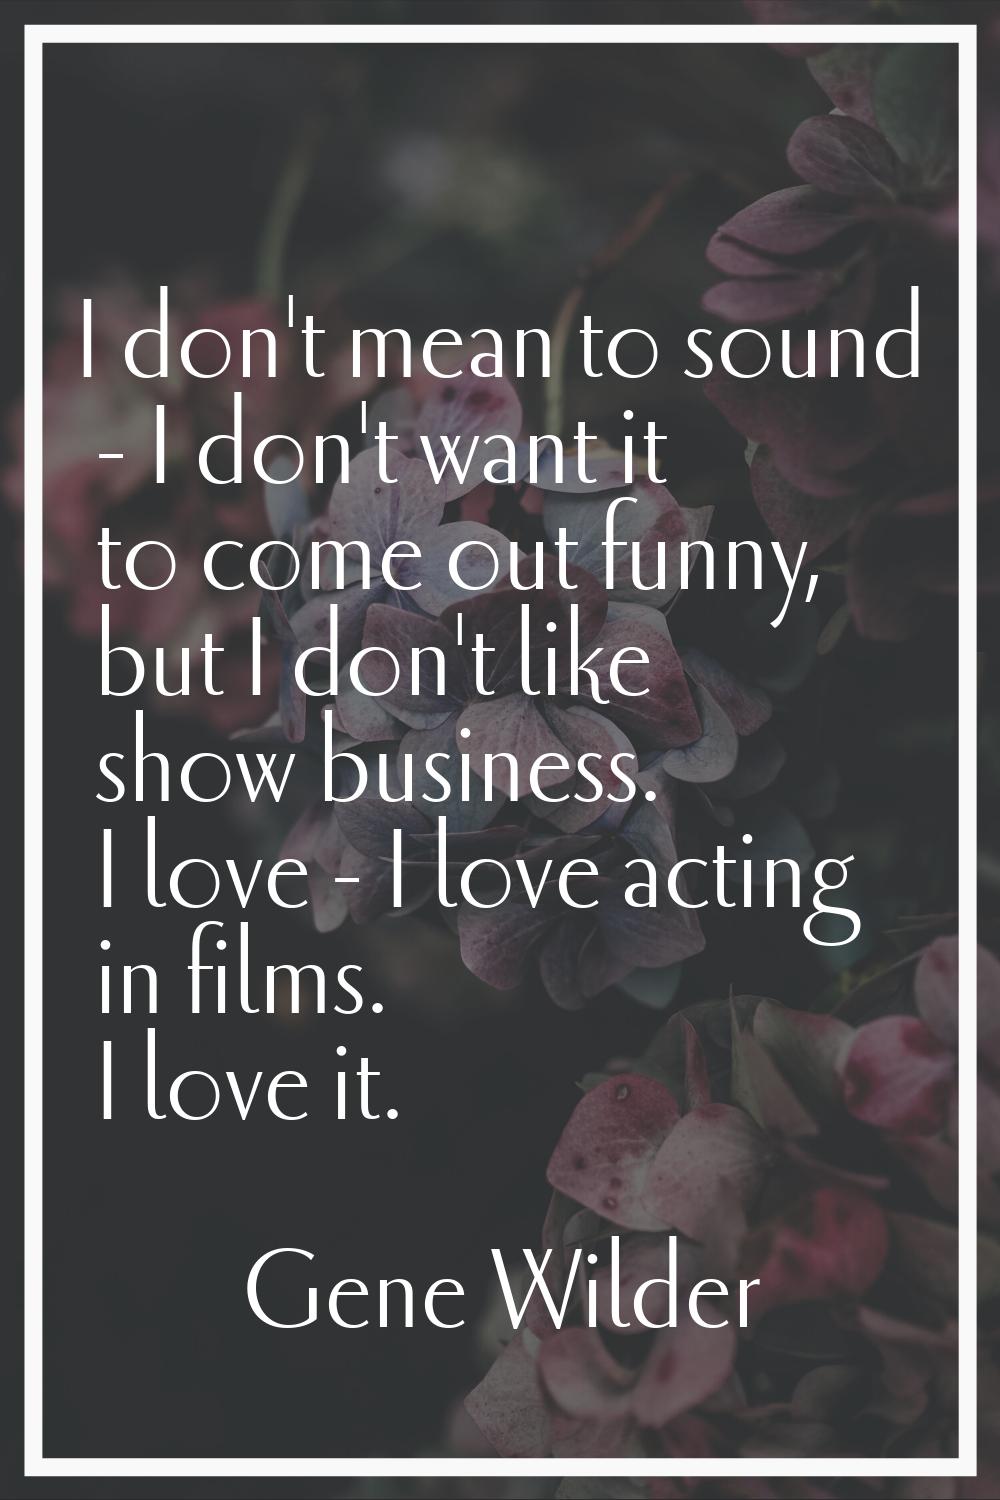 I don't mean to sound - I don't want it to come out funny, but I don't like show business. I love -